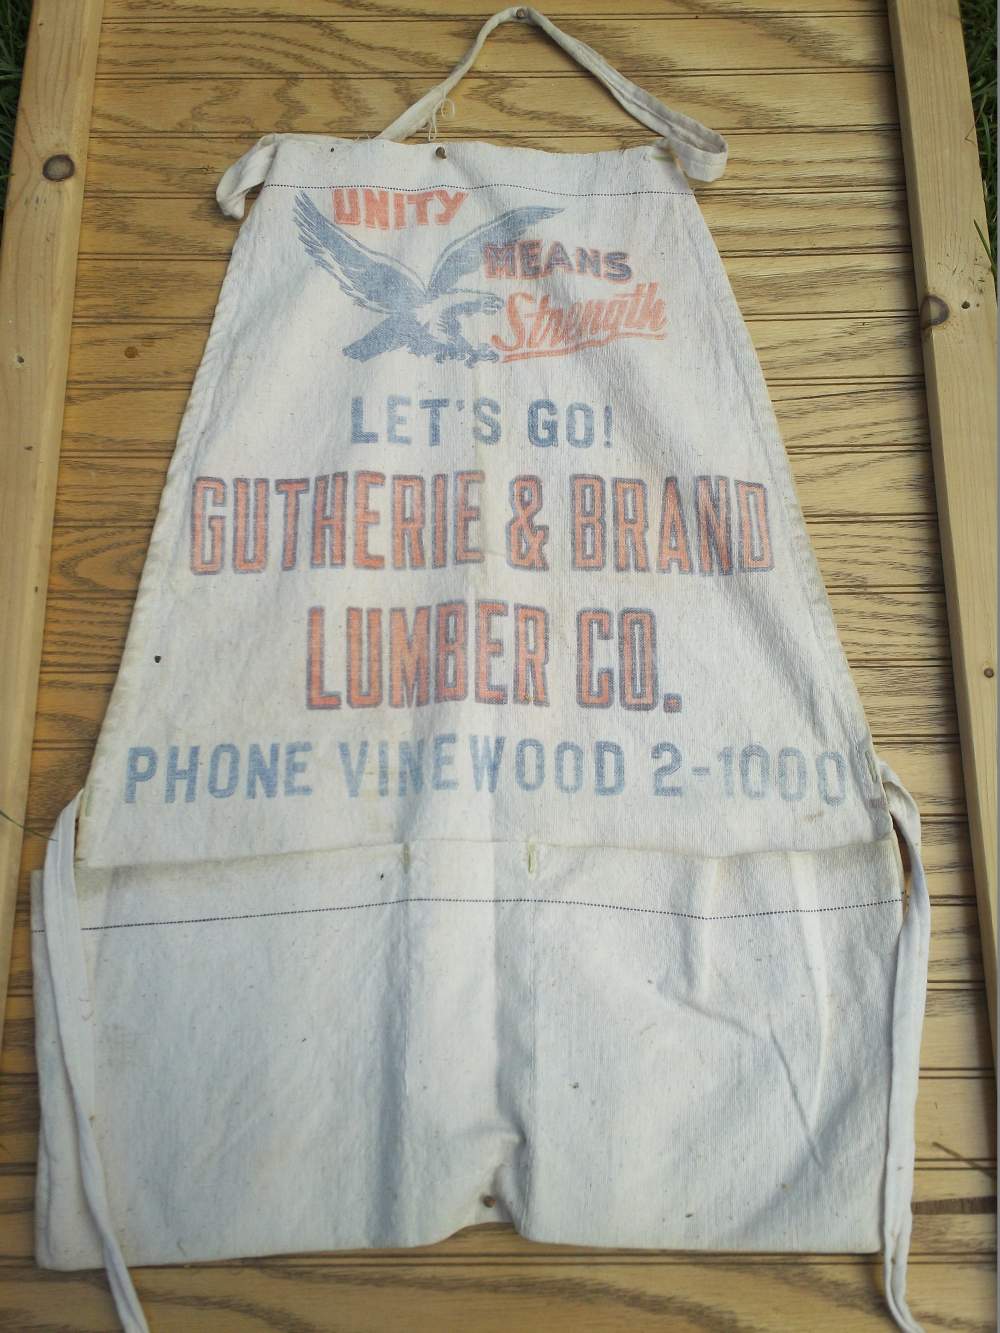 Name:  GLC Gutherie and Brand Lumber.jpg
Views: 821
Size:  142.7 KB